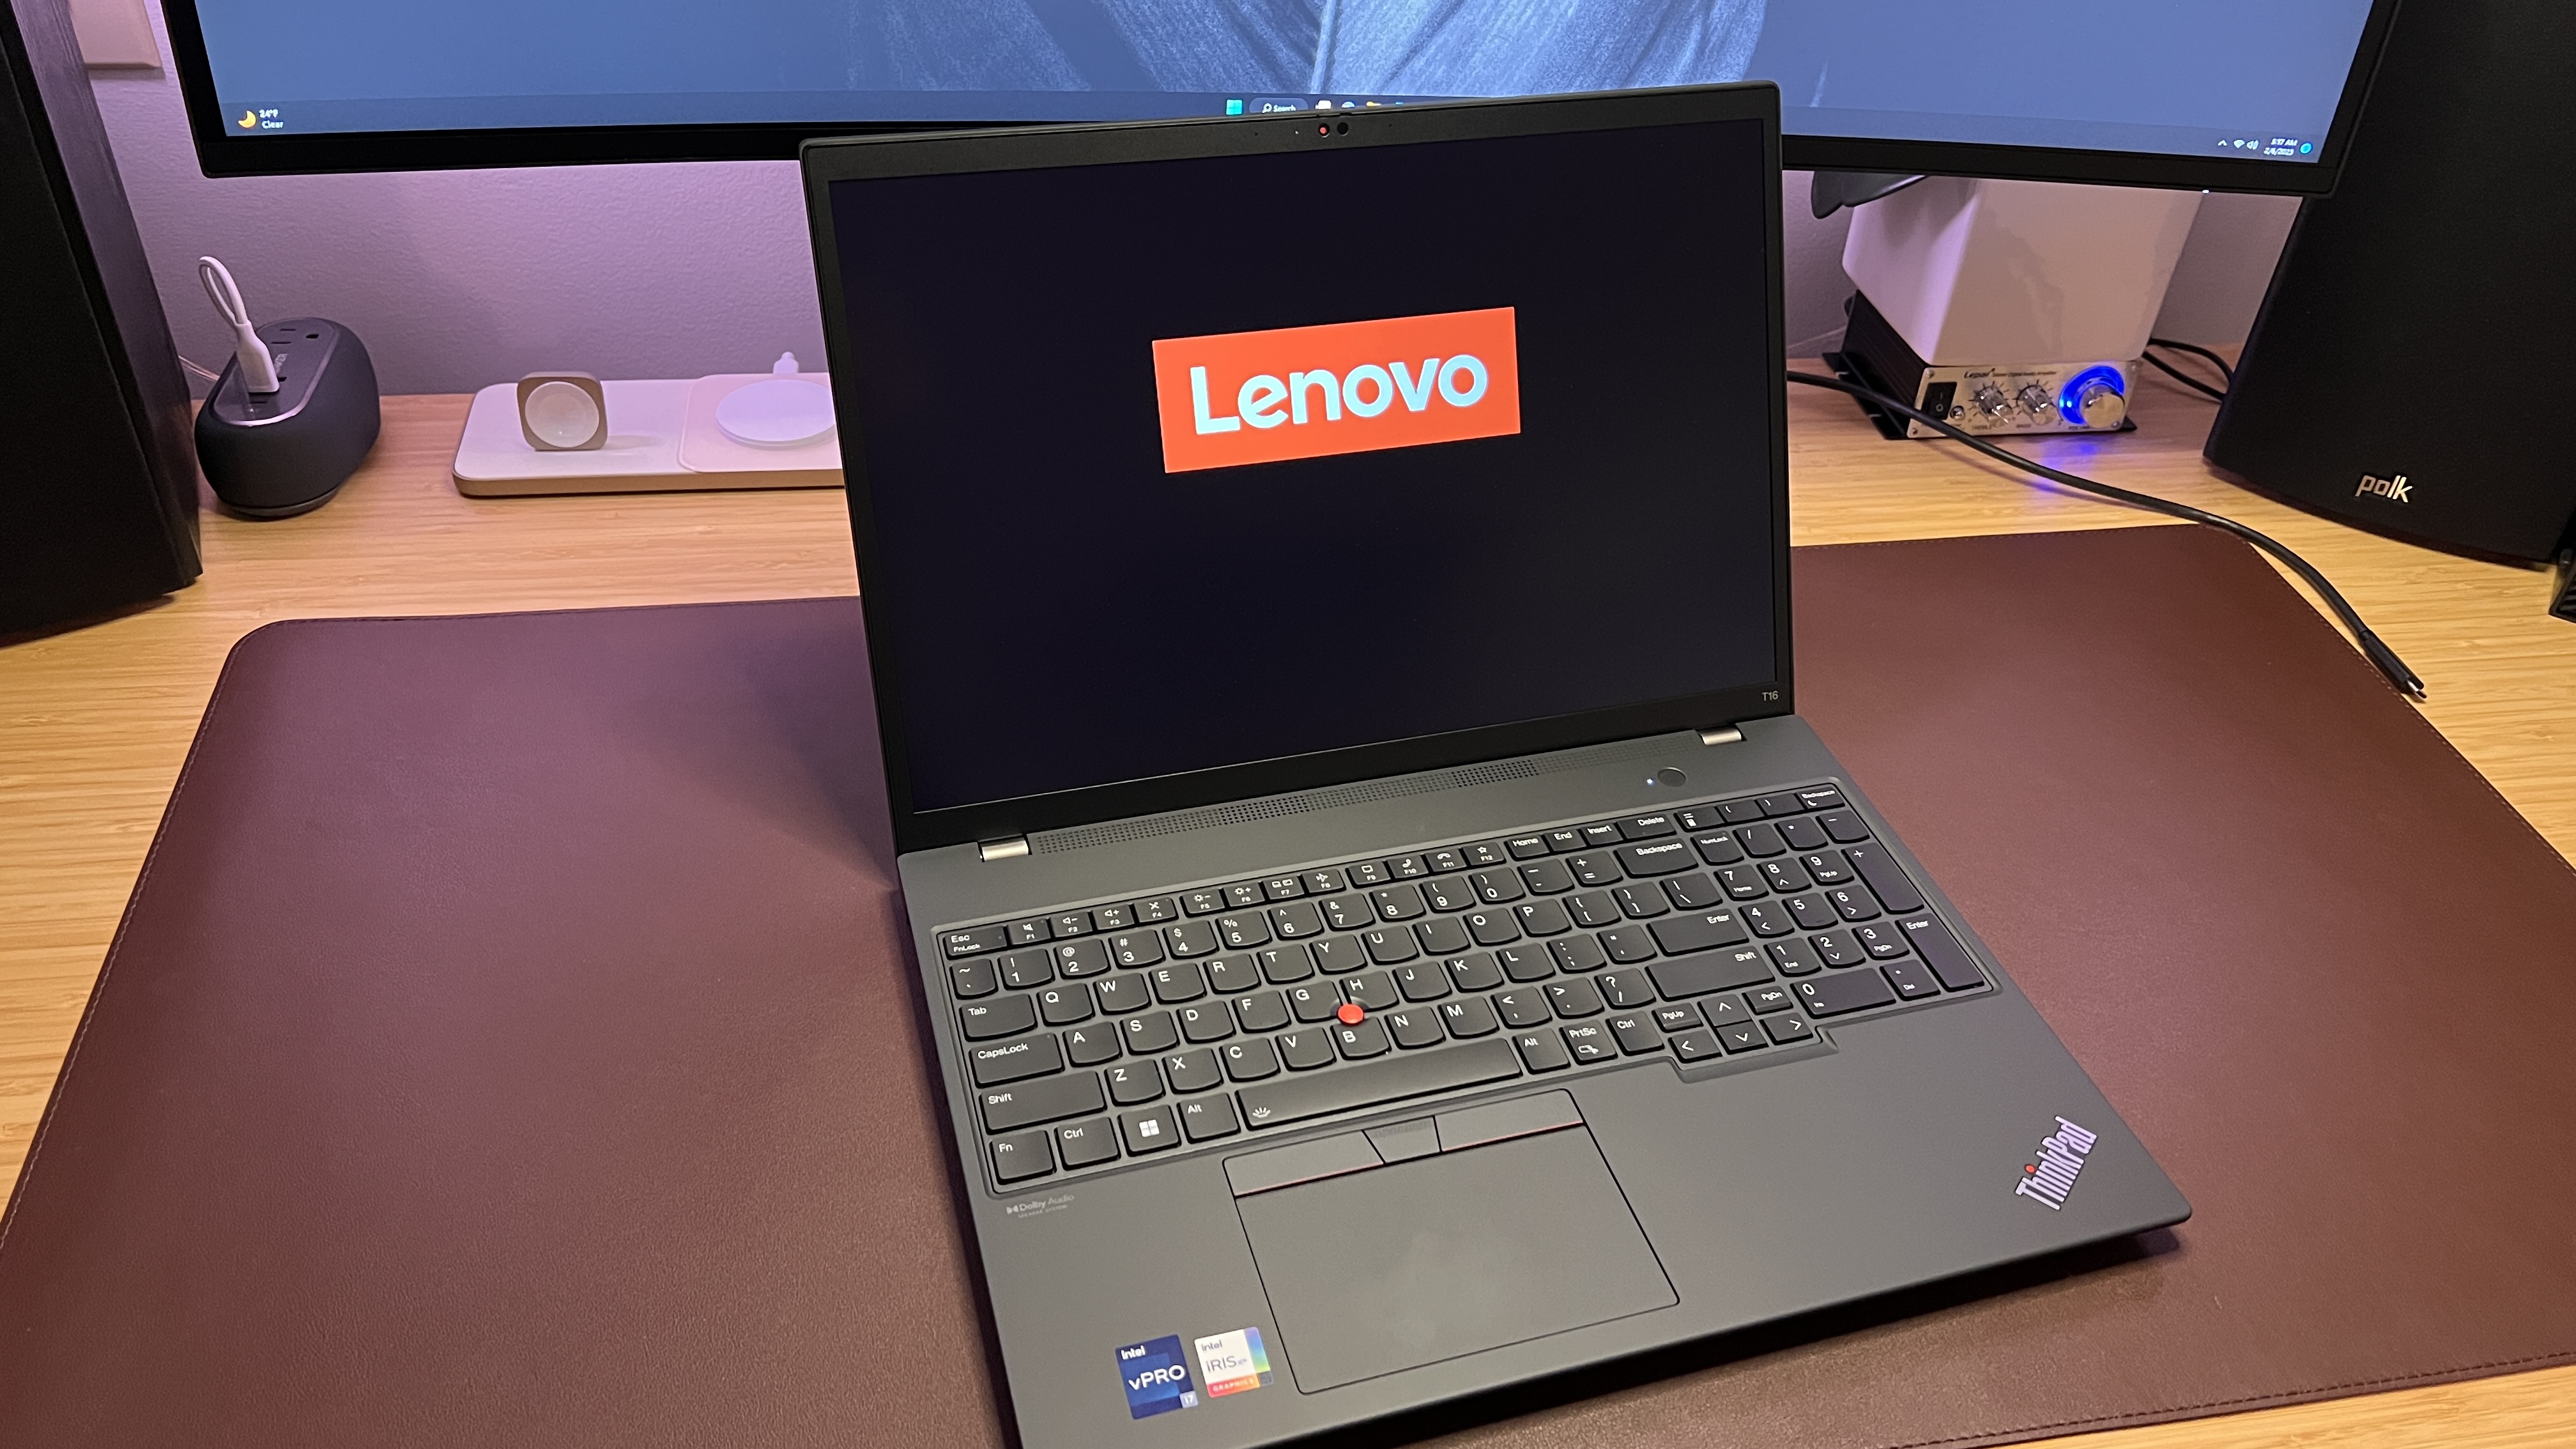 Lenovo Thinkpad T16 Gen 1 review: A big-screened workstation for pros